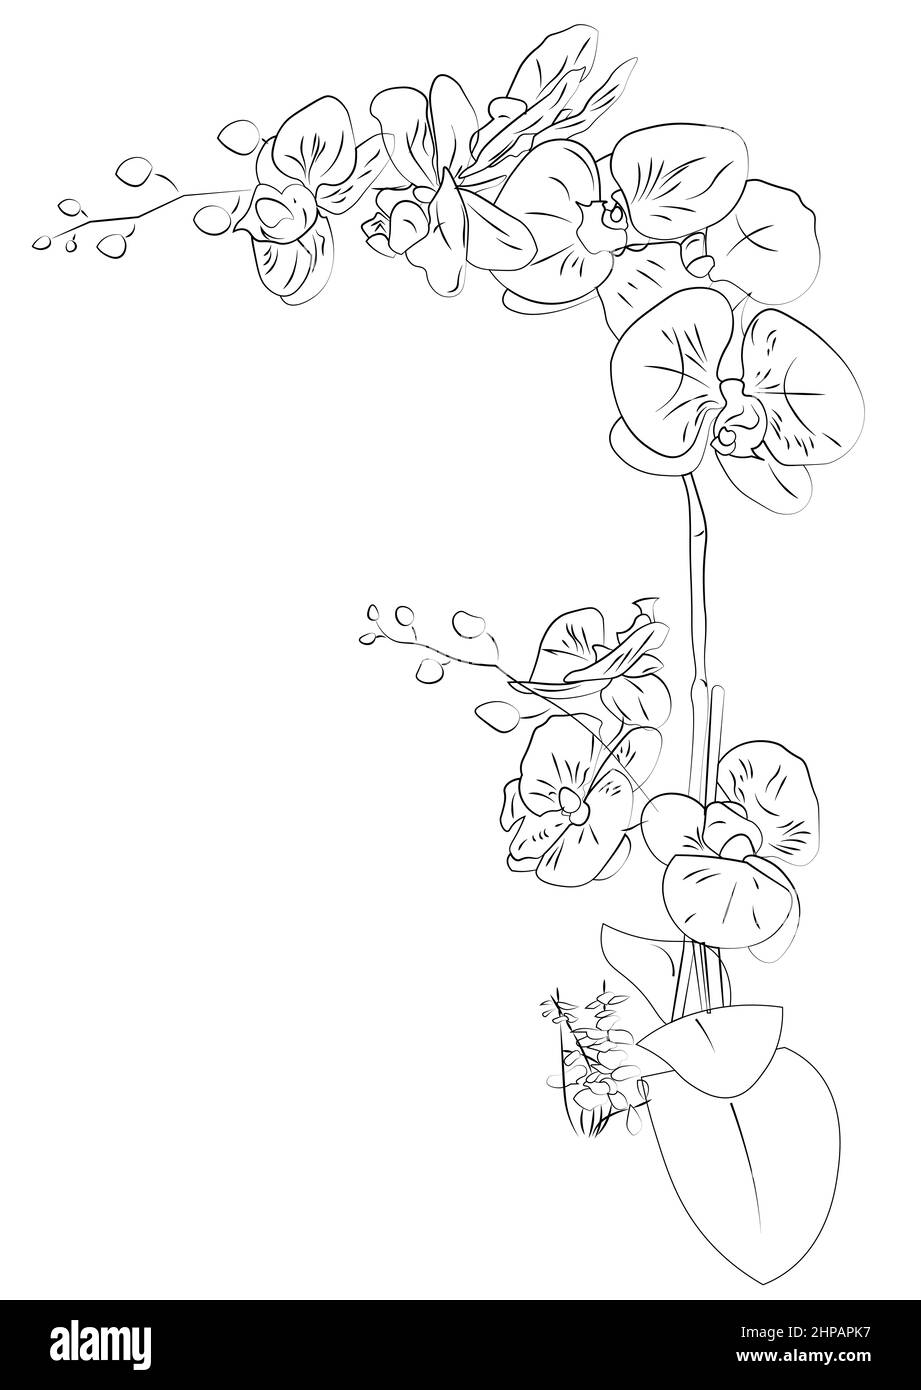 Orchid drawing outline with no color. For border, coloring. Stock Photo